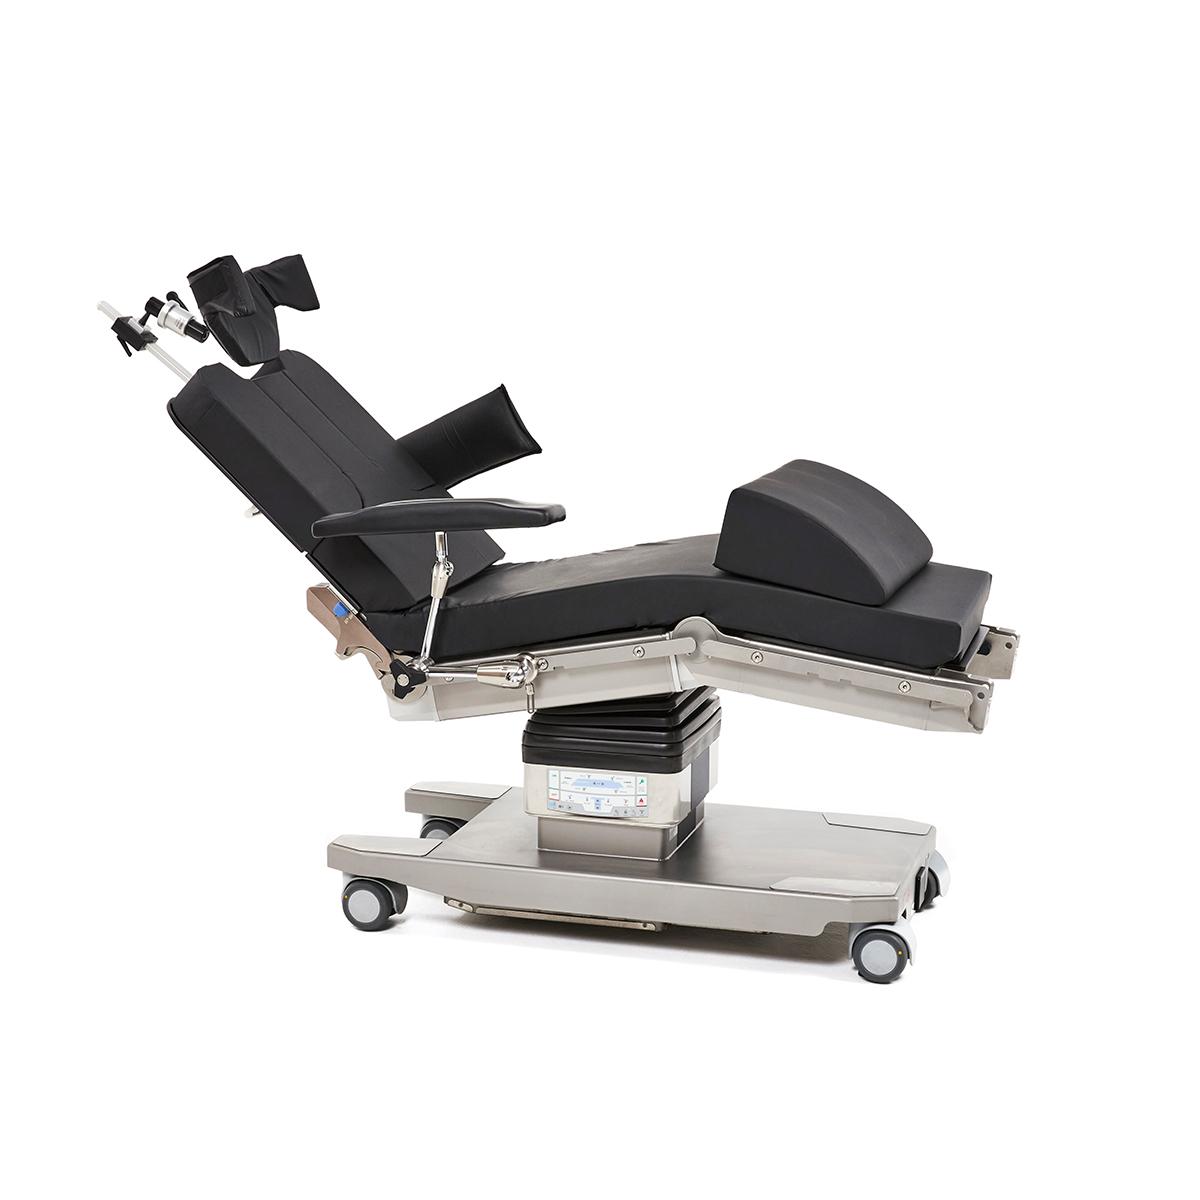 Hillrom Shoulder Chair Accessory Package For Surgical Tables Trumpf Medical Hillrom